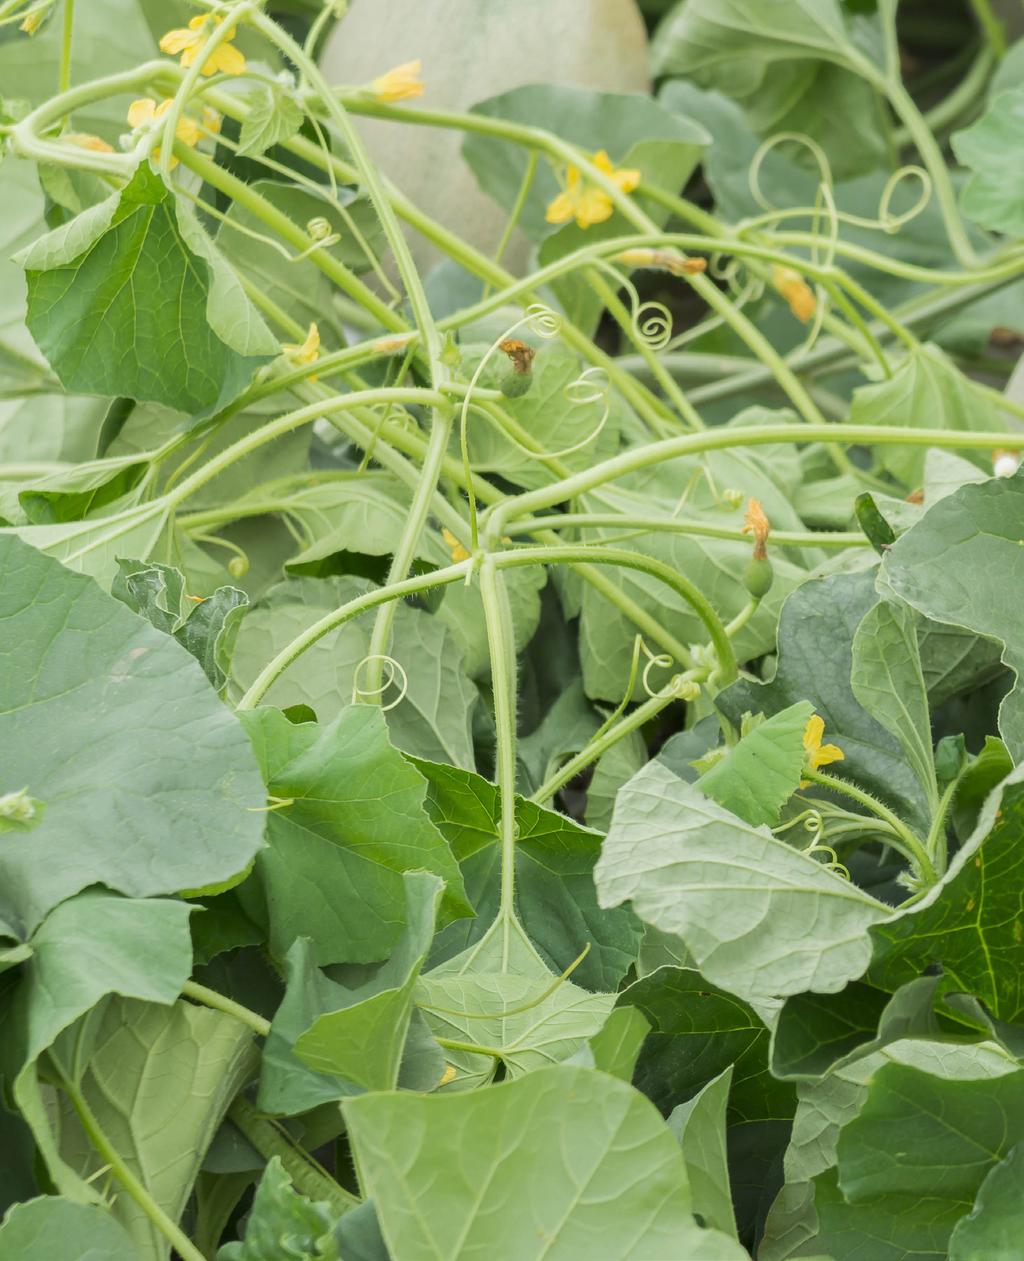 Diseases are a significant cause of crop loss in melons, and although there have been significant IPM advances in disease control since 2003, new challenges have emerged.